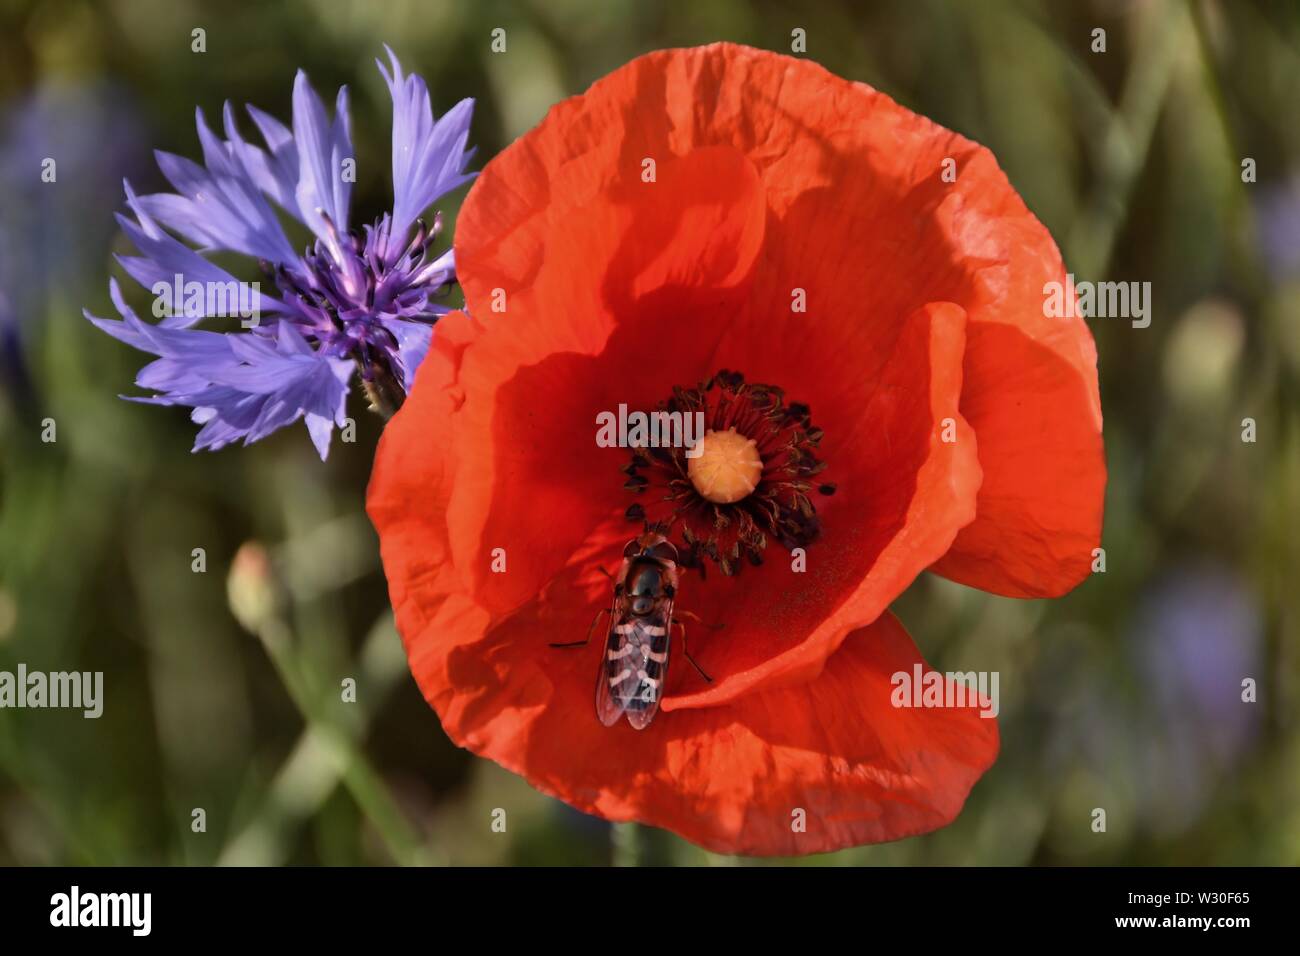 Insect at a poppy flower Stock Photo